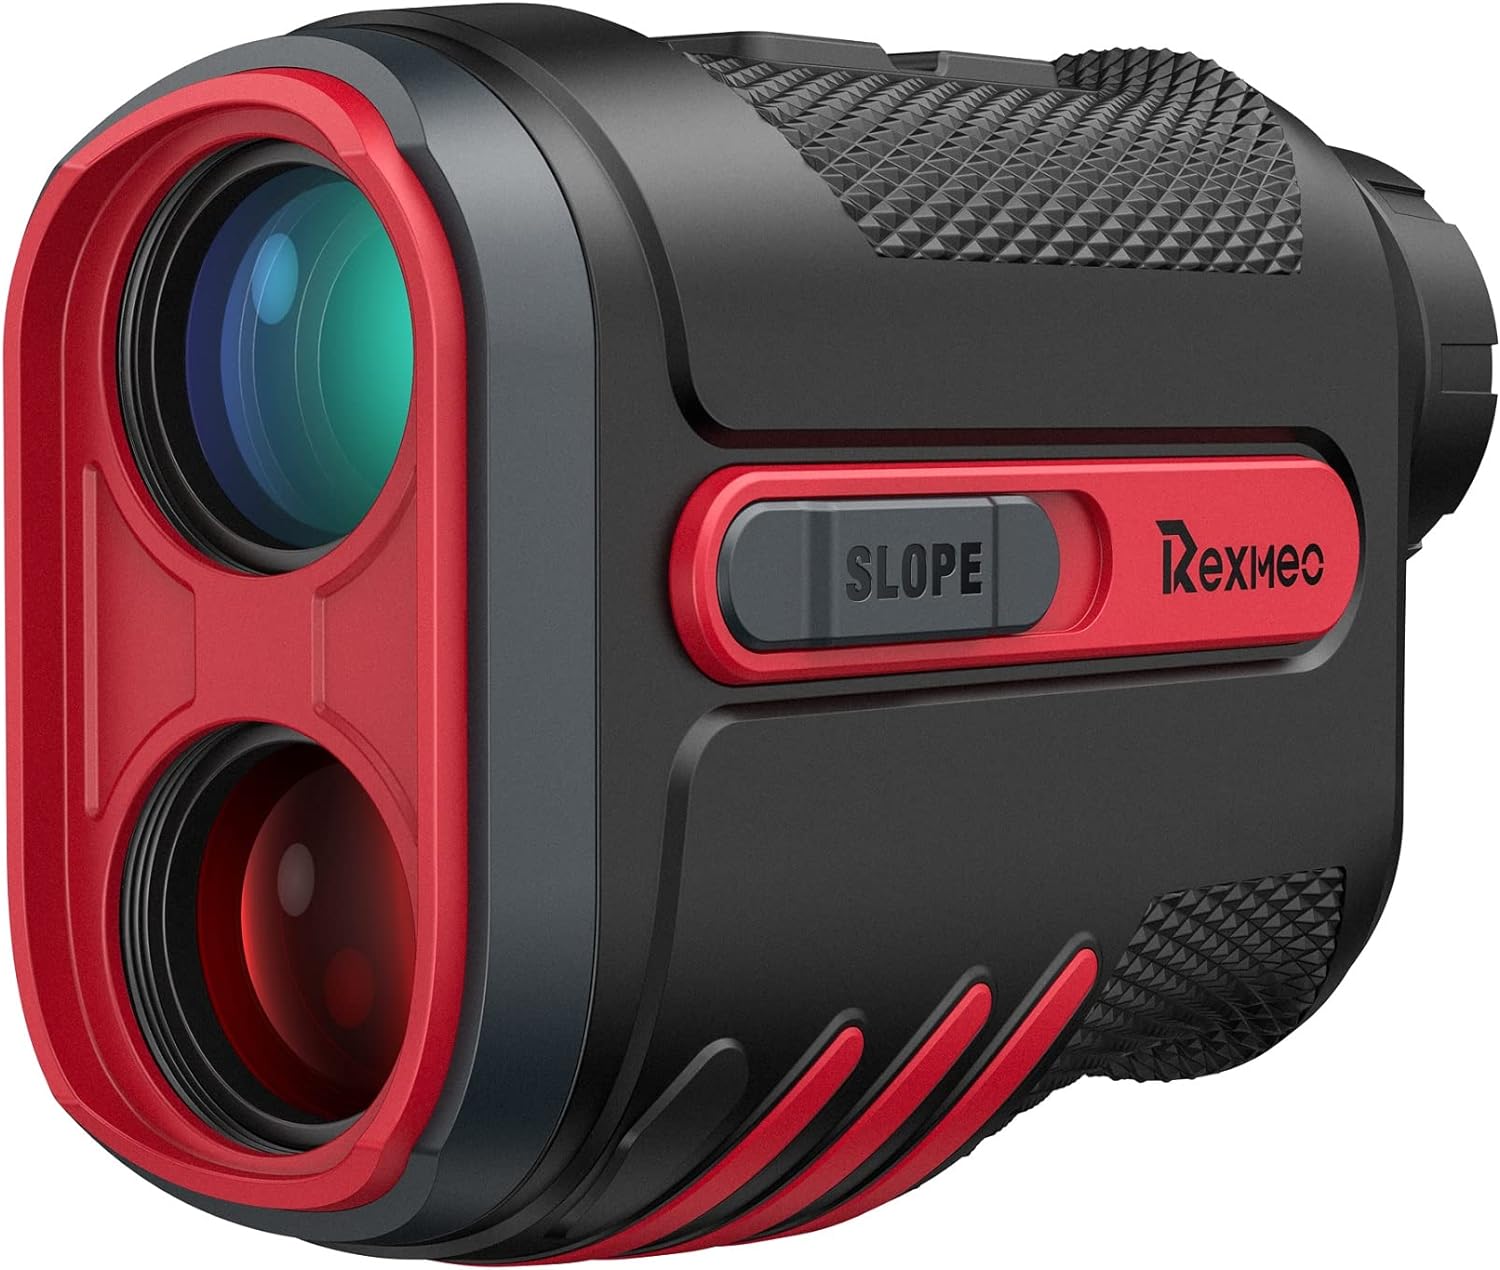 REXMEO Golf Rangefinder with Slope, USB C Rechargeable Laser Range Finder Golfing 1000Y with 6X Magnification, High-Precision Flag Lock Pulse Vibration, Magnet Stripe for Target Shooting and Hunting